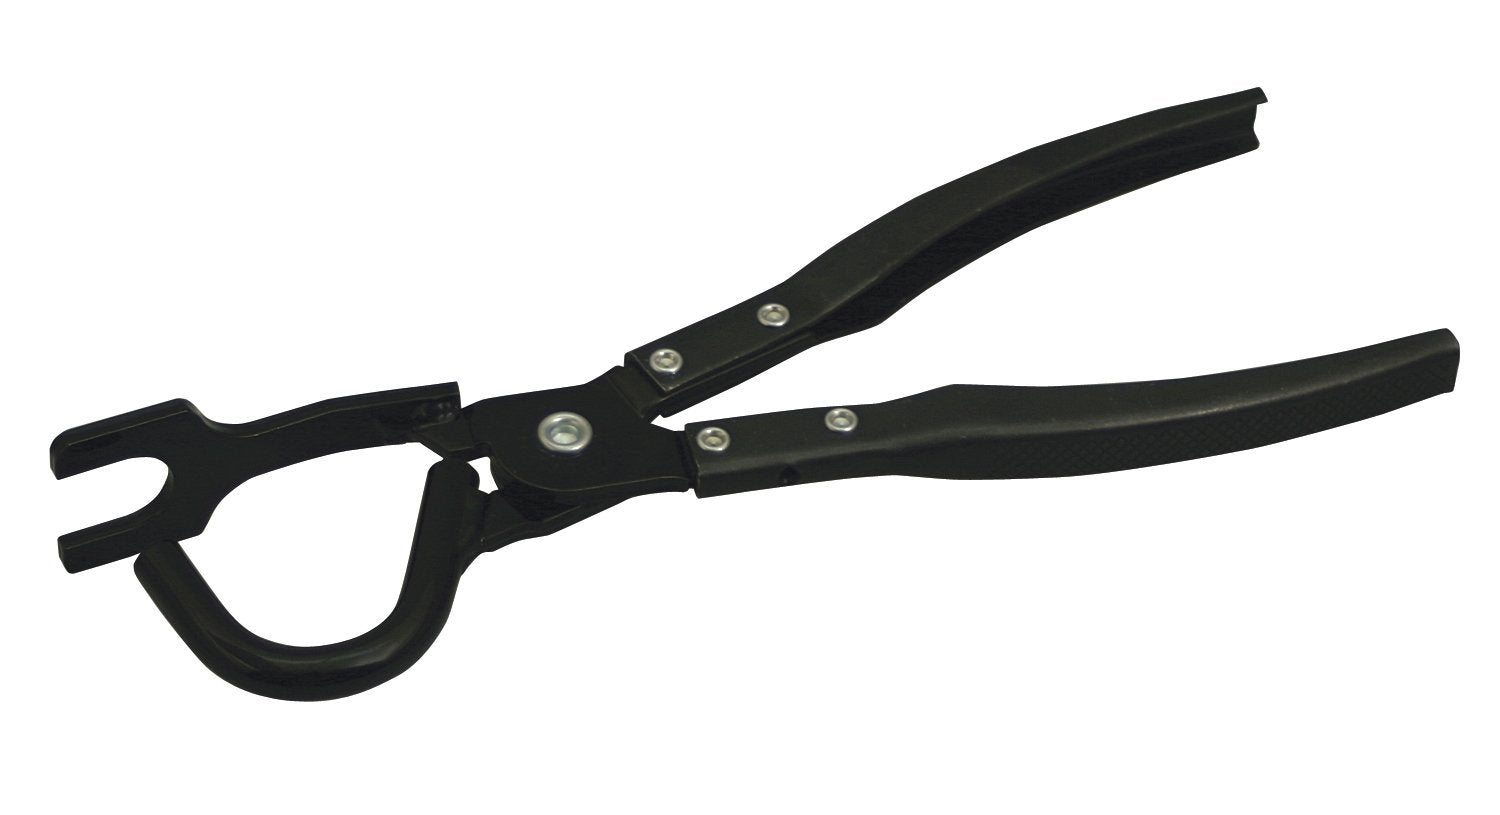 Lisle 38350 Exhaust Hanger Removal Pliers - MPR Tools & Equipment